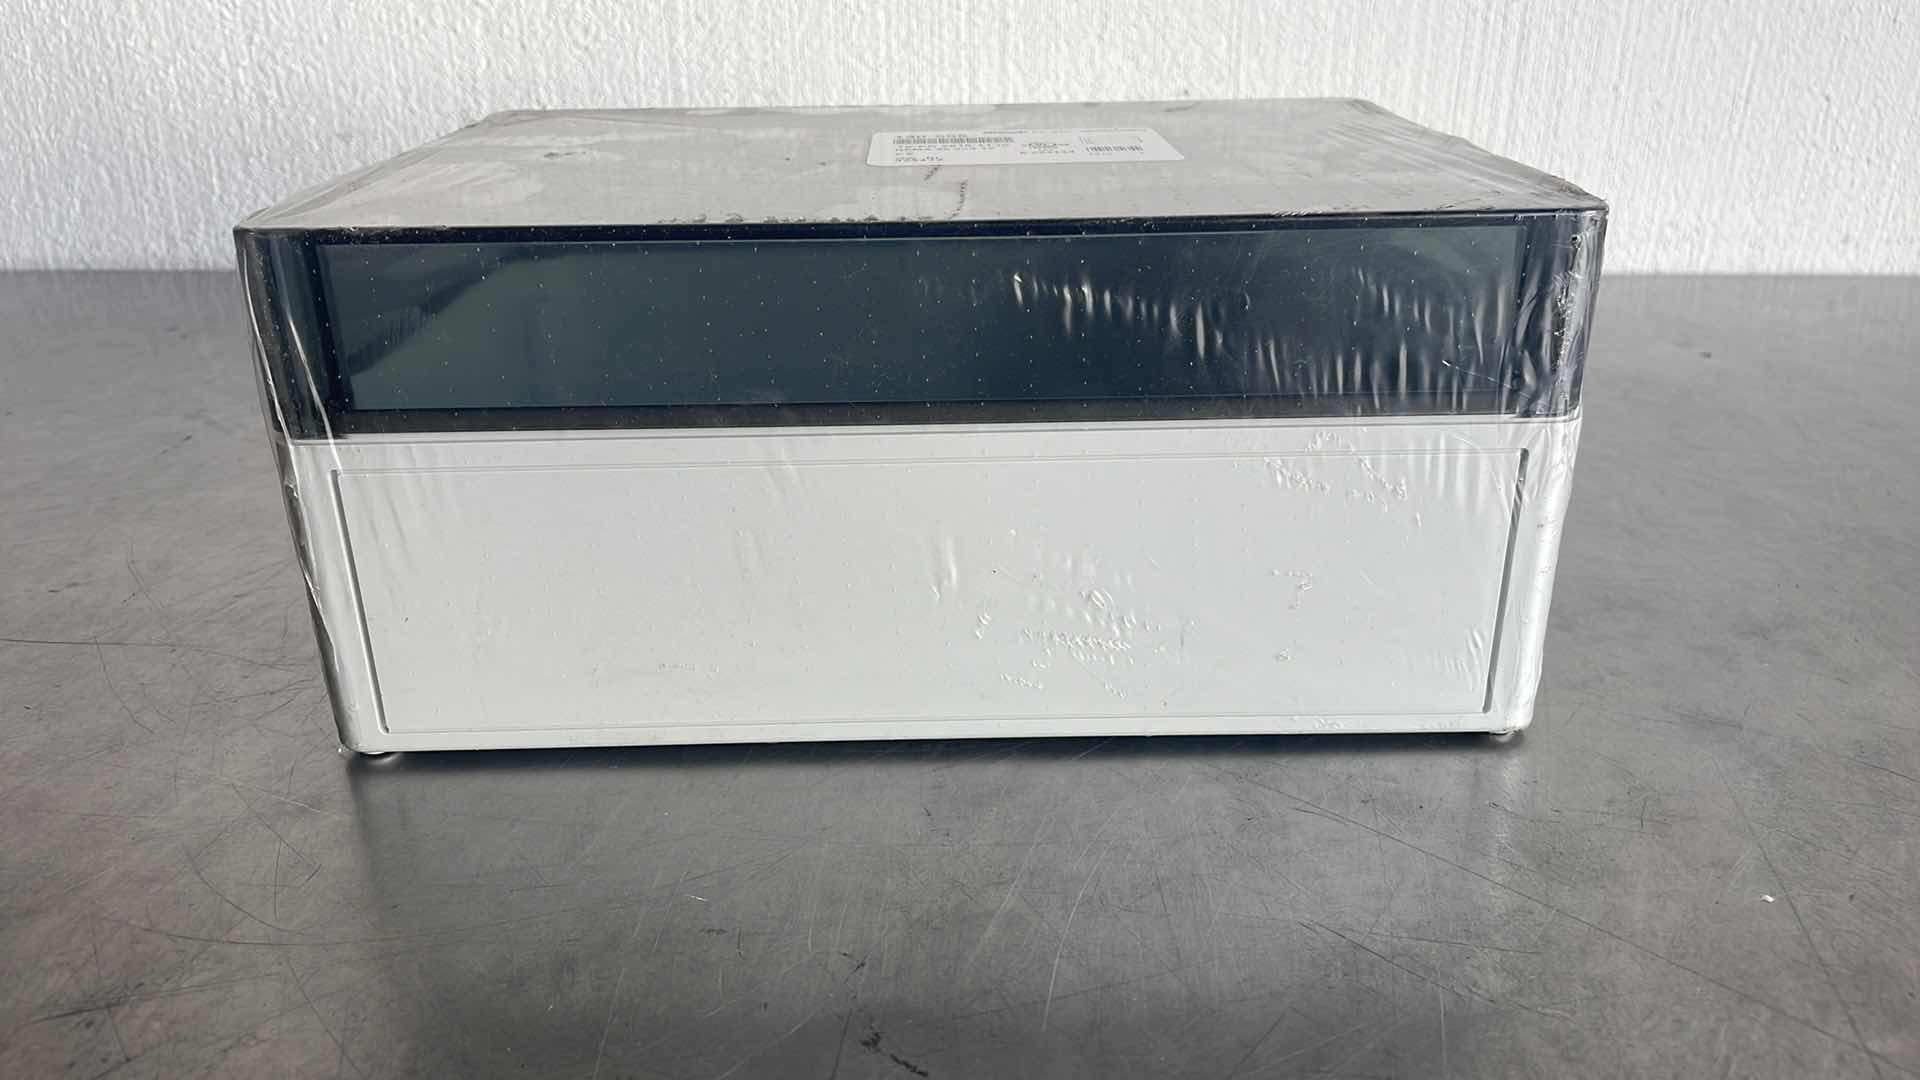 Photo 3 of NEW SEALED ALTECH BY ELS SPELSBERG INDUSTRIAL AUTOMATION ENCLOSURE 130-508 TK PC 2518-11 TO NEMA4X AND 12